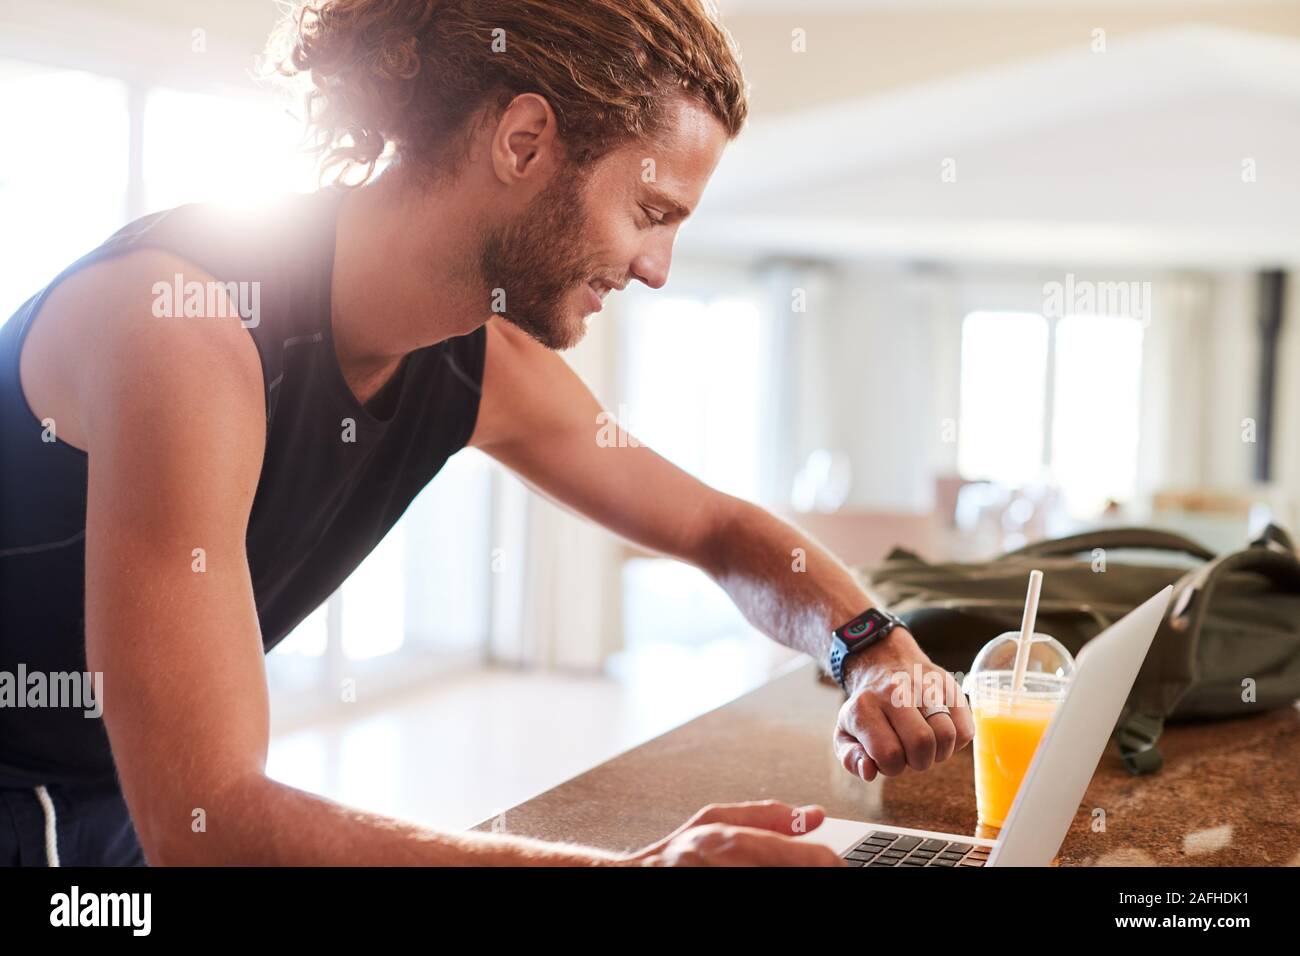 Millennial white man checking fitness app on watch and laptop after a workout, side view Stock Photo